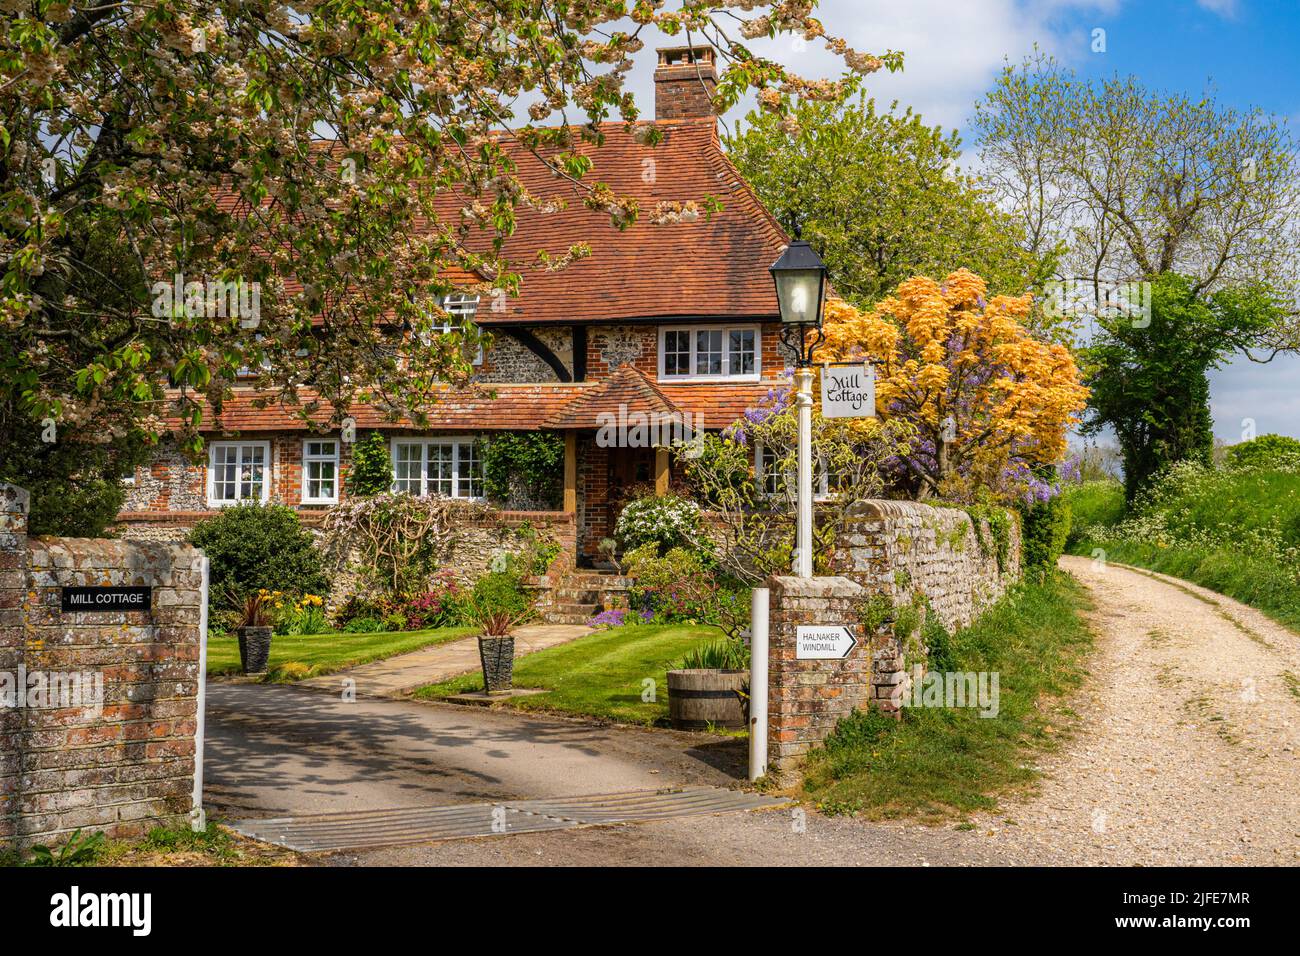 A quintessential, chocolate box type cottage on the path leading up to Halnaker Windmill in the South Downs National Park near Chichester, West Sussex Stock Photo